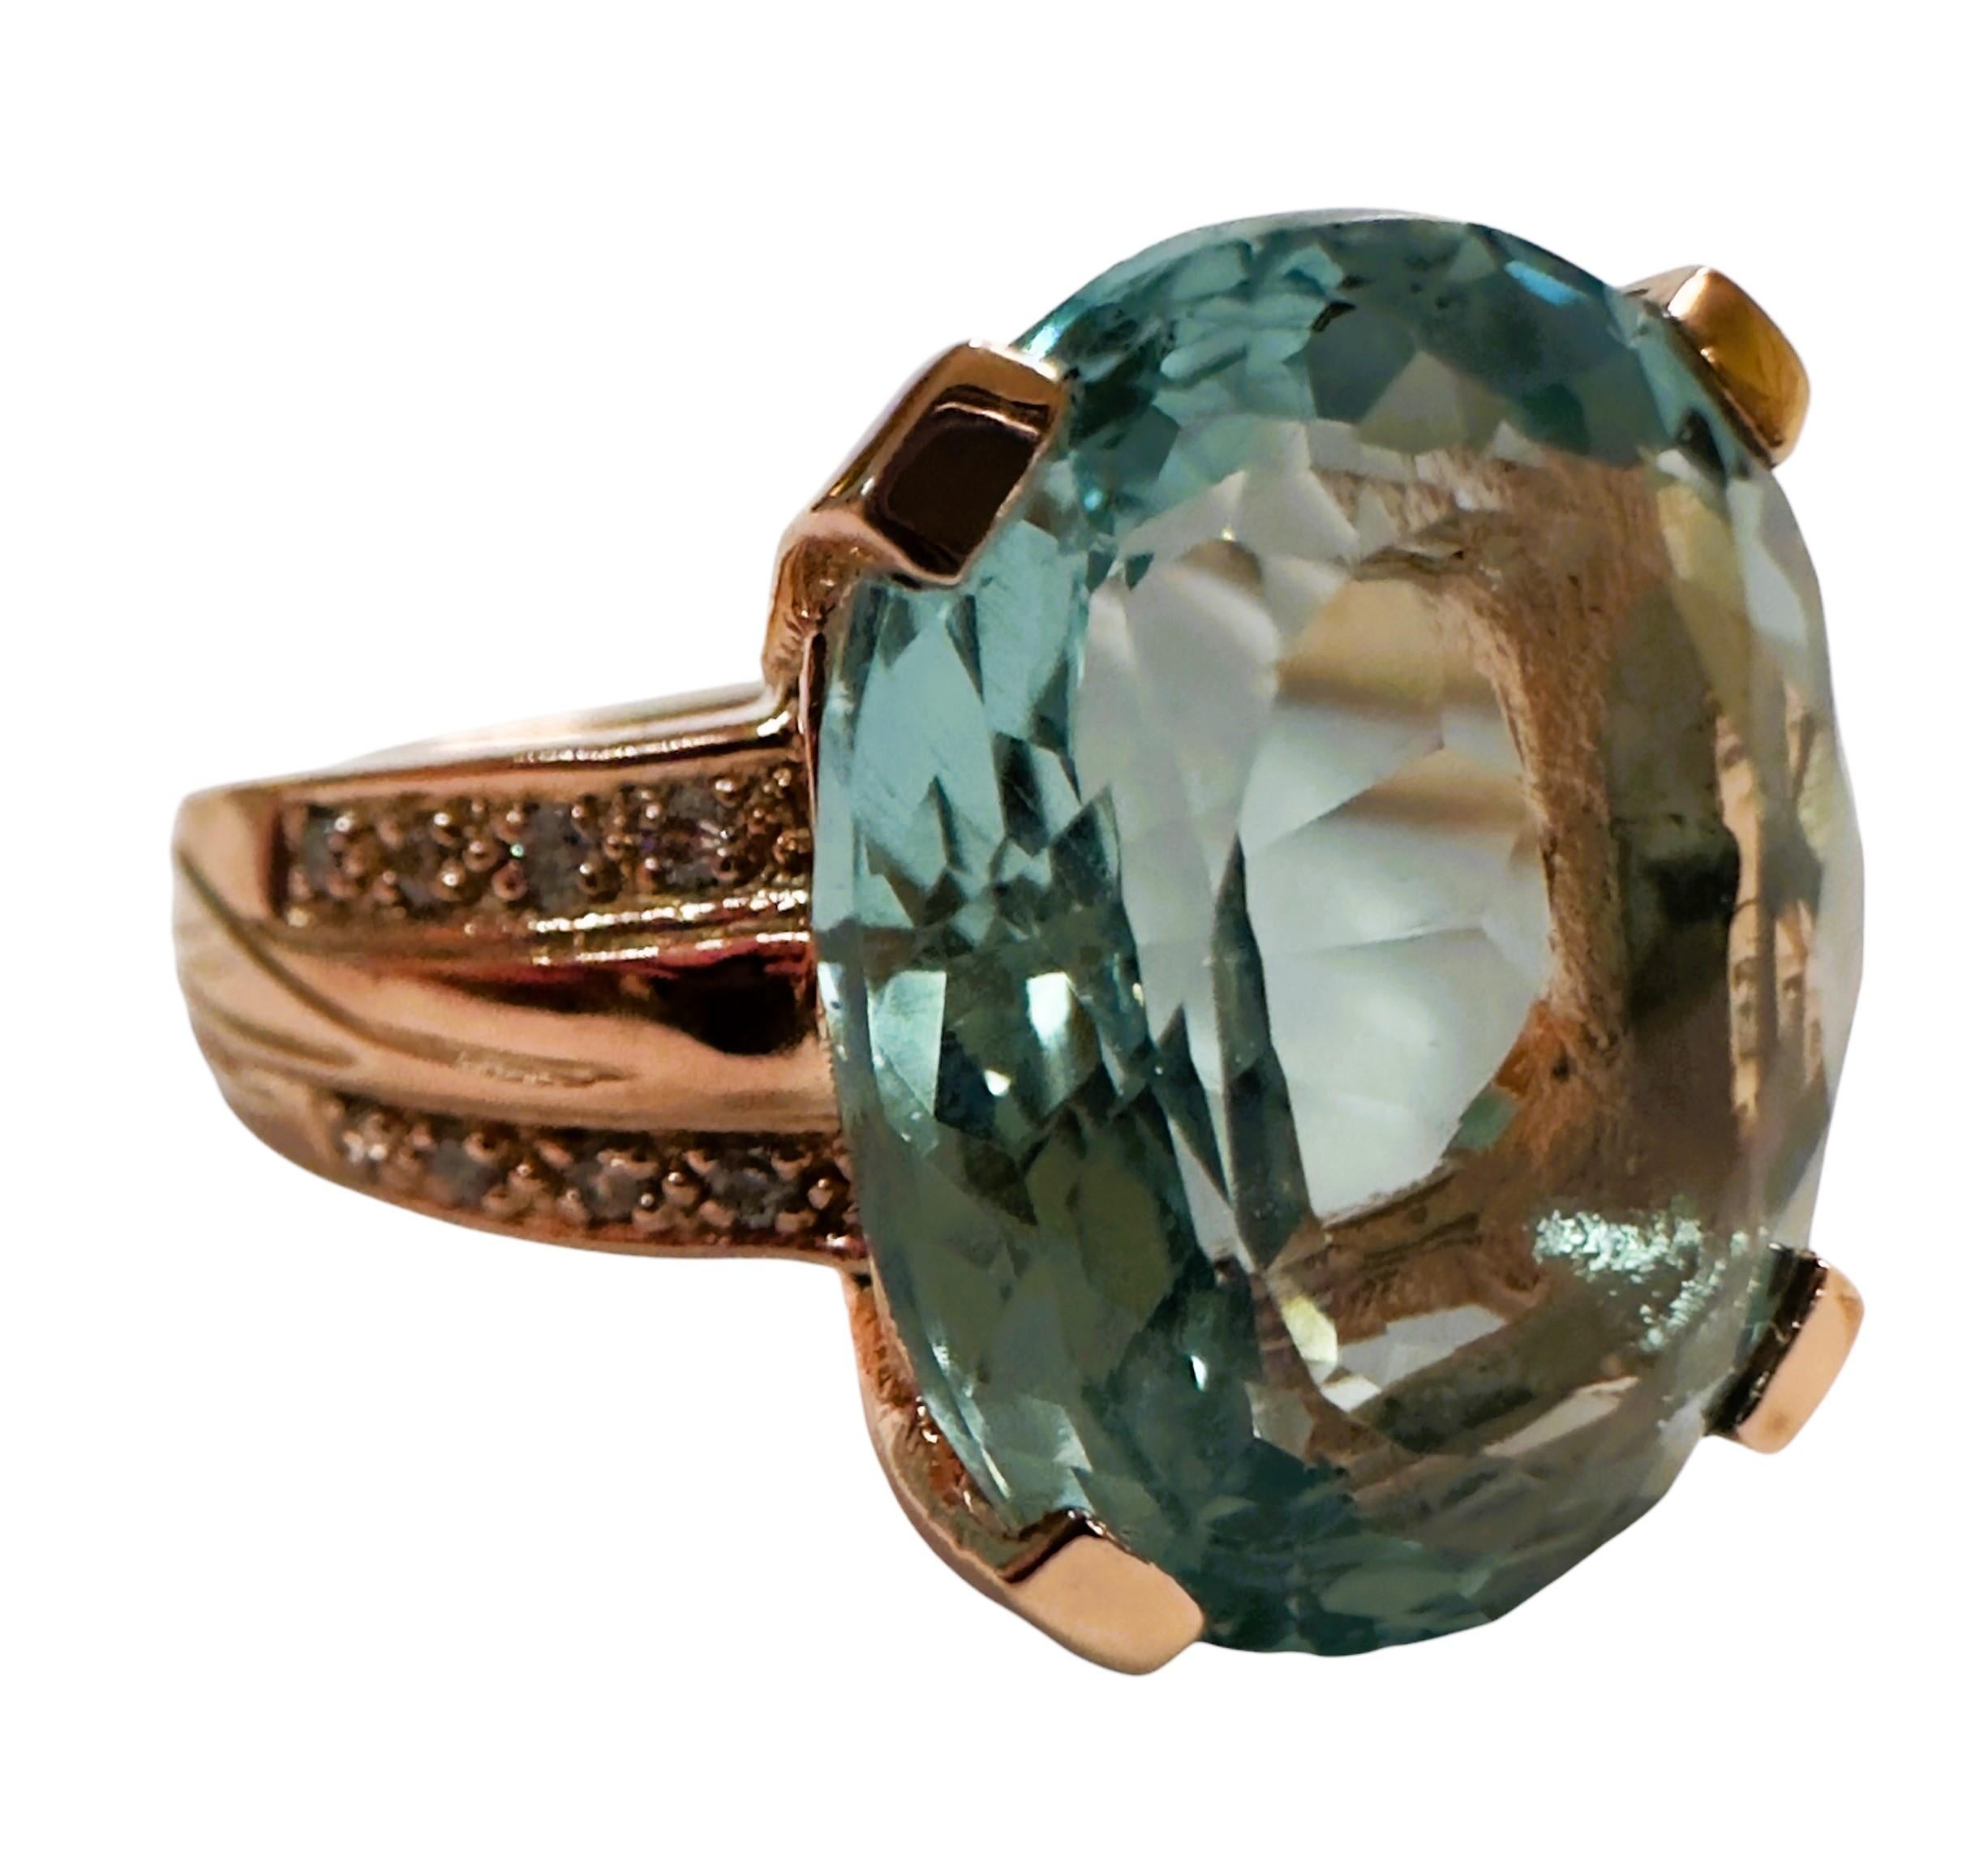 New Santa Maria 12.1 Ct Aquamarine & White Sapphire RGold Plated Sterling Ring  In New Condition For Sale In Eagan, MN